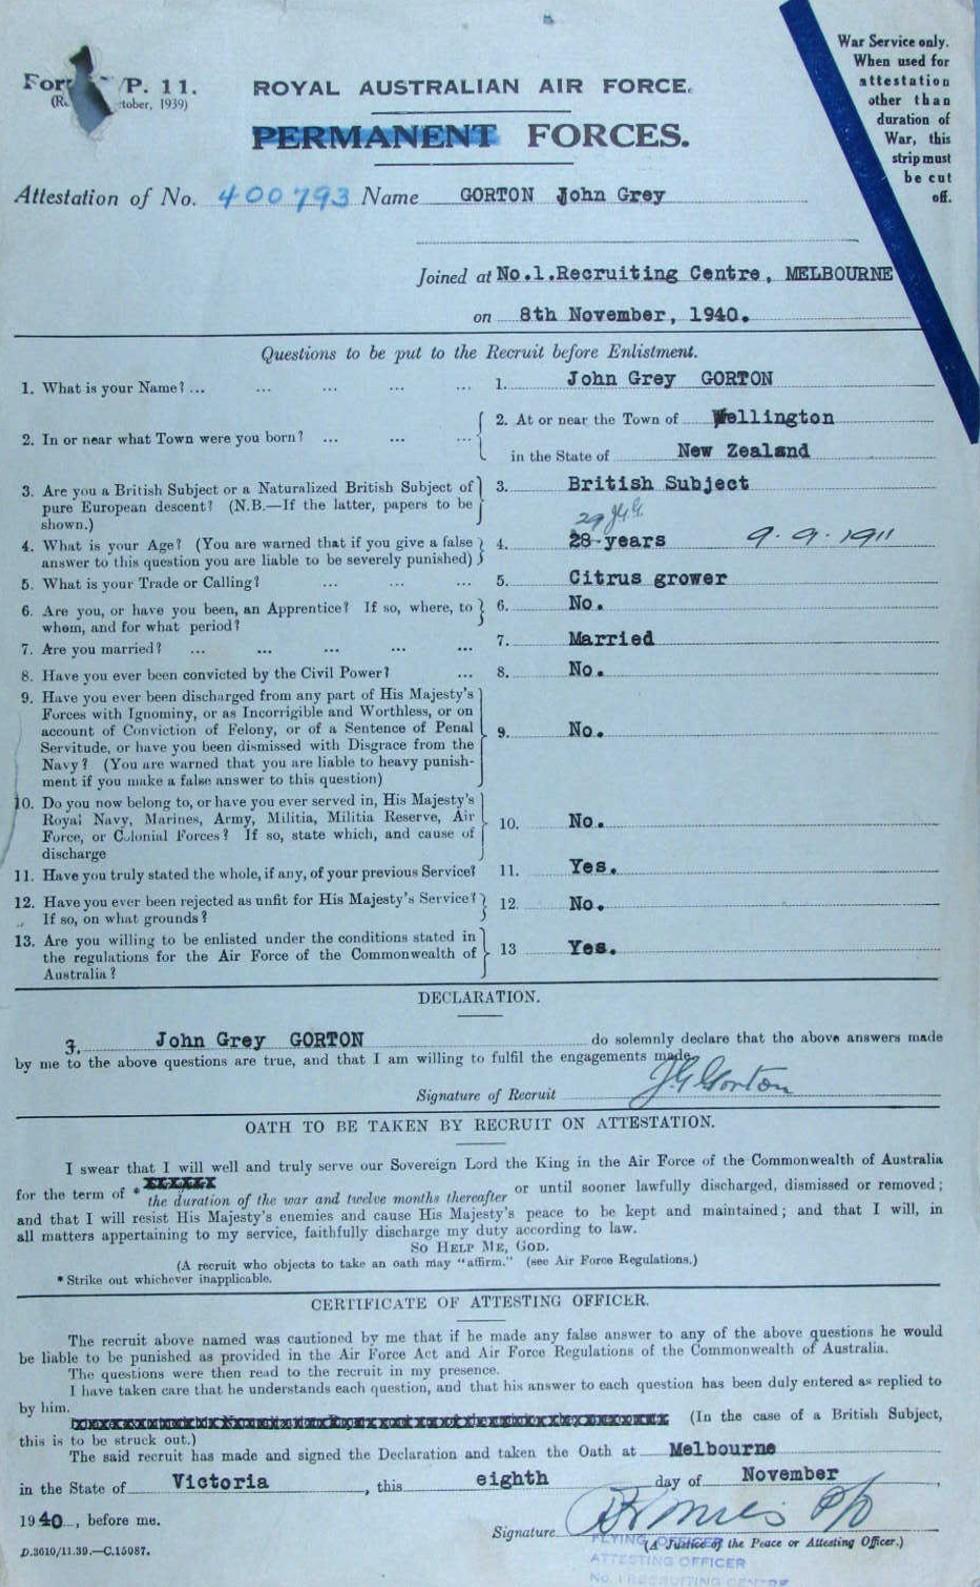 John Gorton’s Royal Australian Air Force enlistment papers, dated 8 November 1940, when he was 29 years old.